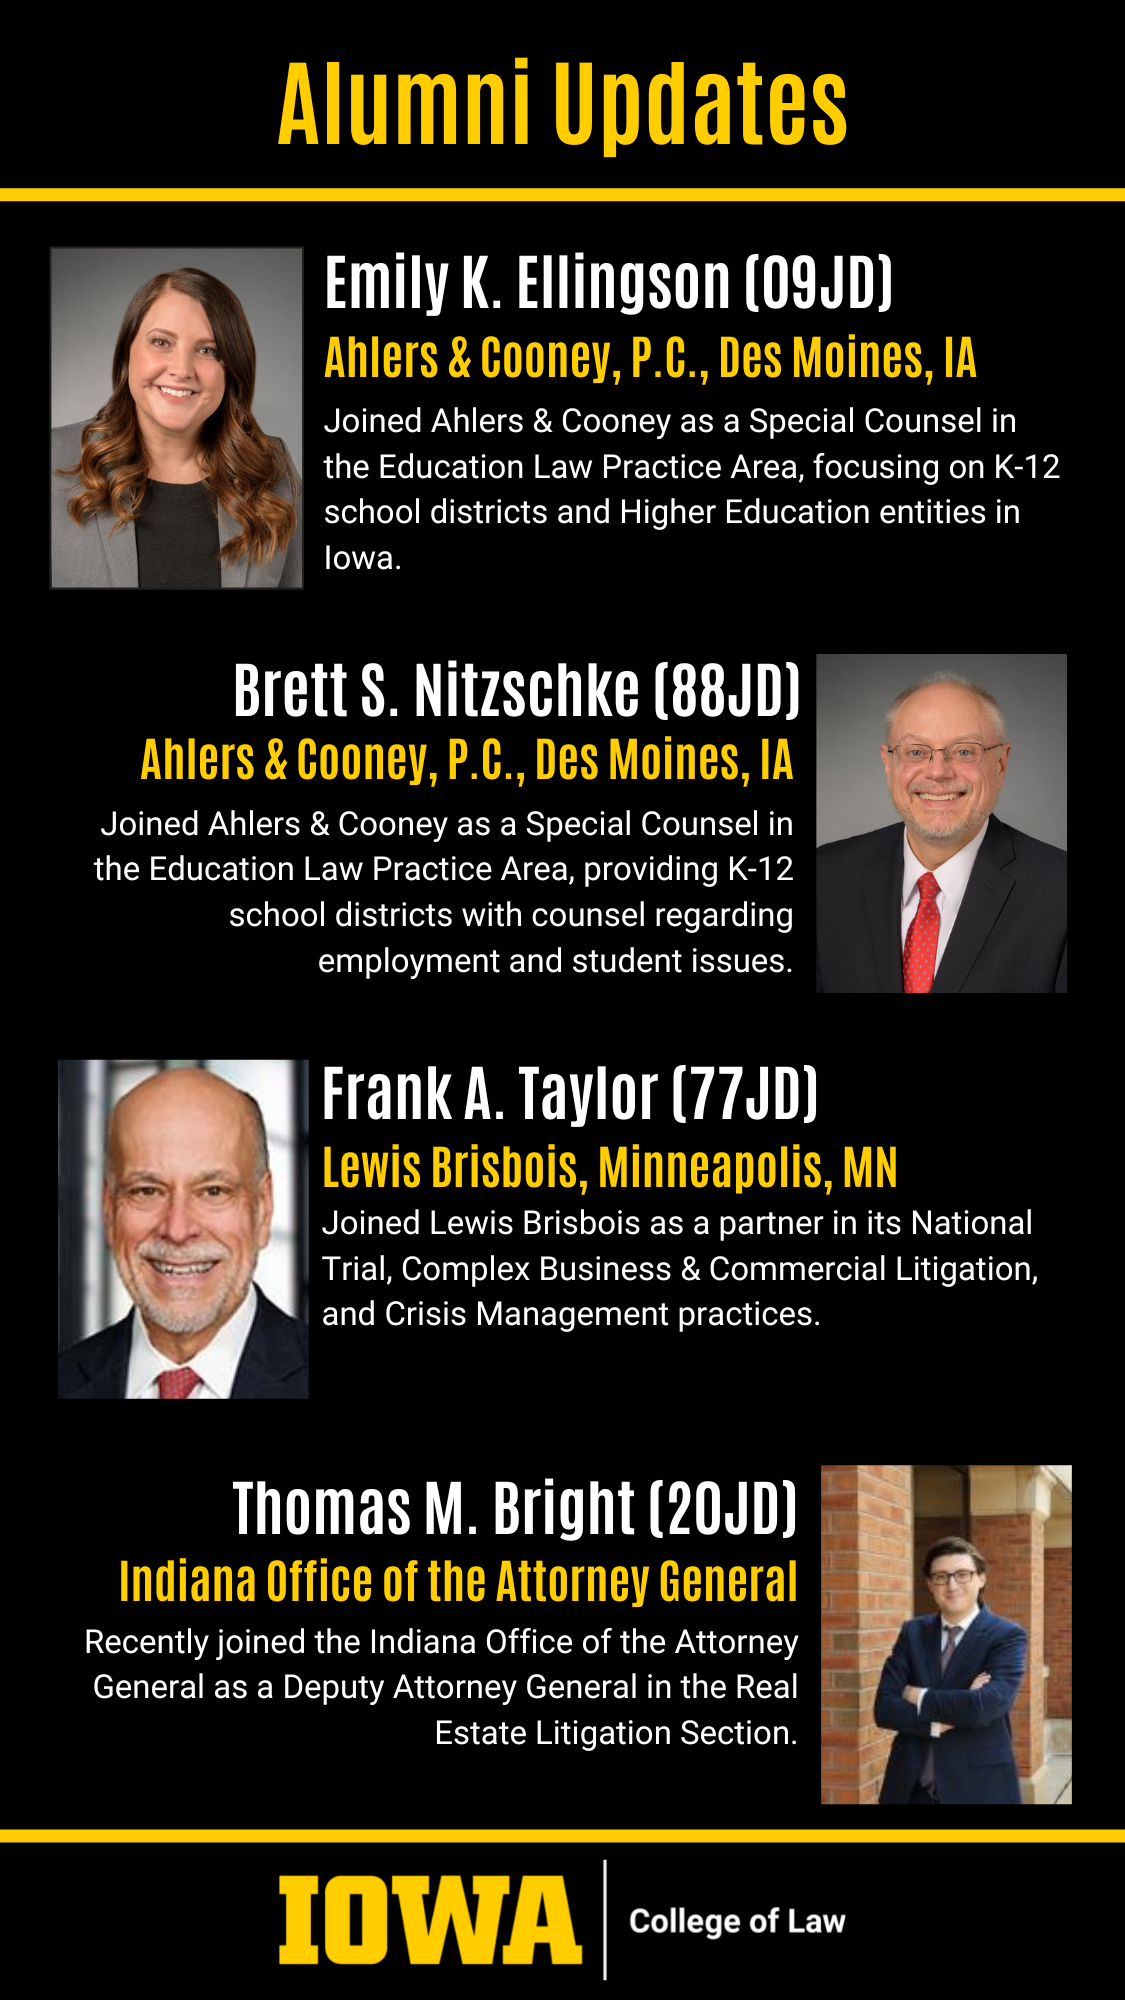 Emily K. Ellingson (09JD) Ahlers & Cooney, P.C., Cedar Rapids, IA Recently joined Ahlers & Cooney as a Special Counsel in the Education Law Practice Area, focusing on K-12 school districts and Higher Education entities in Iowa. Frank A. Taylor (77JD) Lewis Brisbois, Minneapolis, MN Recently joined Lewis Brisbois as partner in their National Trial, Complex Business & Commercial Litigation areas amongst others. Thomas M. Bright (20JD) Indiana Office of the Attorney General Recently joined the Indiana Office of the Attorney General as a Deputy Attorney General in the Real Estate Litigation Section. Brett S. Nitzschke (88JD) Ahlers & Cooney, P.C., Cedar Rapids, IA Recently joined Ahlers & Cooney as a Special Counsel in the Education Law Practice Area, providing K-12 school districts with counsel regarding employment and student issues.